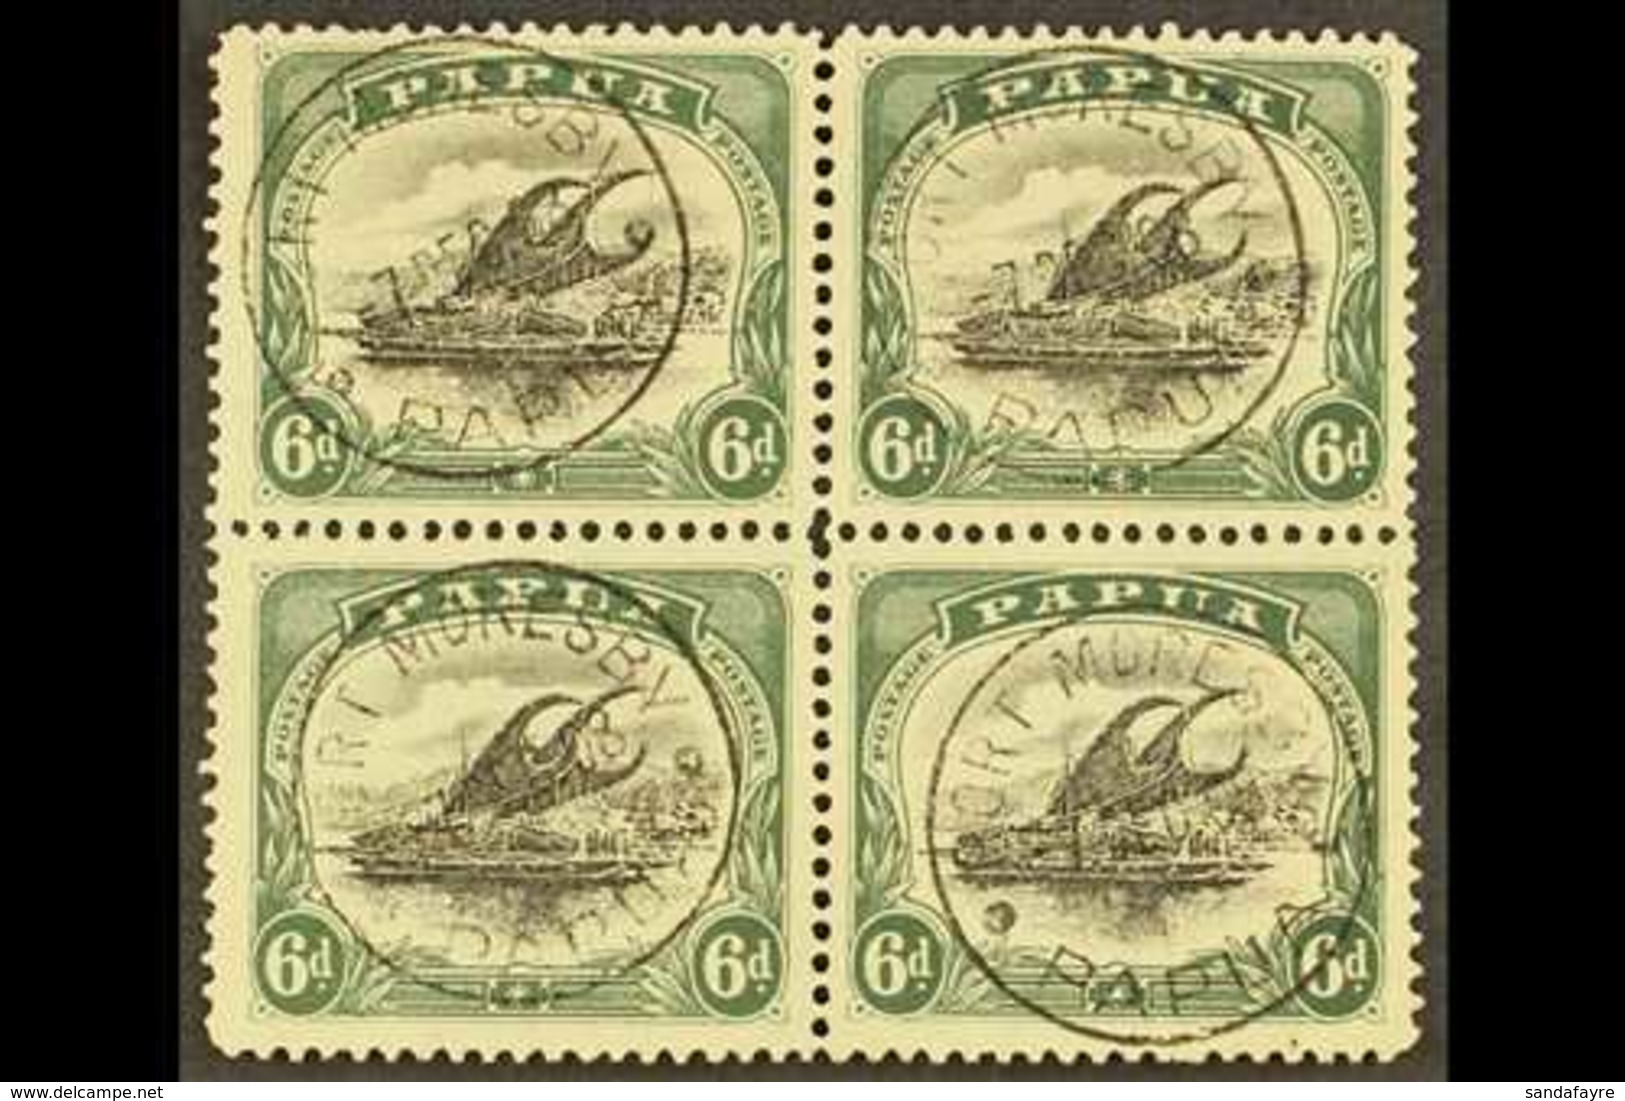 1907-98  Small Papua, Watermark Upright Perf 11 6d Black And Myrtle Green, SG 53, Superb Cds Used Block Of Four, Port Mo - Papouasie-Nouvelle-Guinée